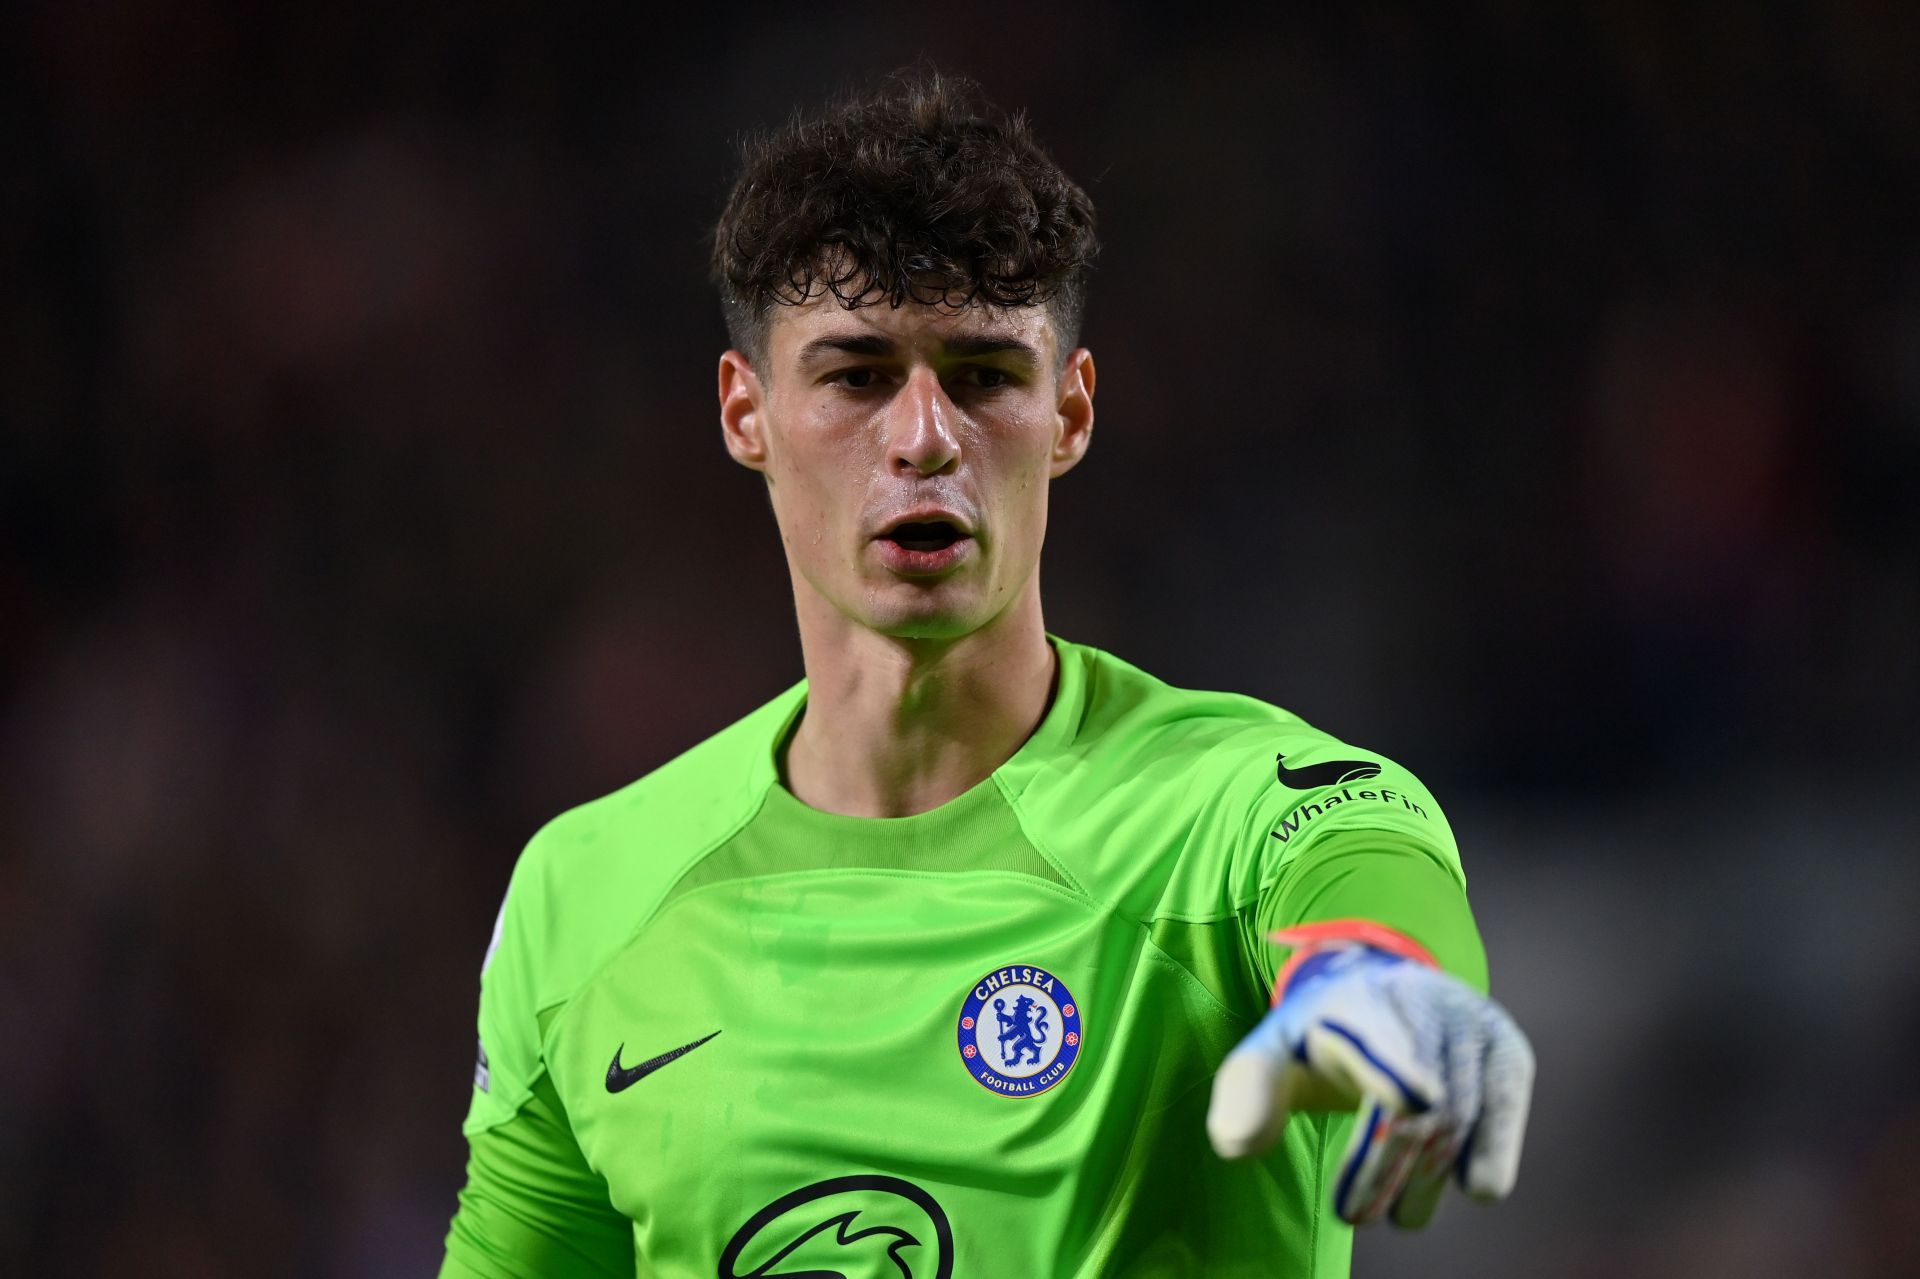 Kepa has kept two clean sheets in the UEFA Champions League this season